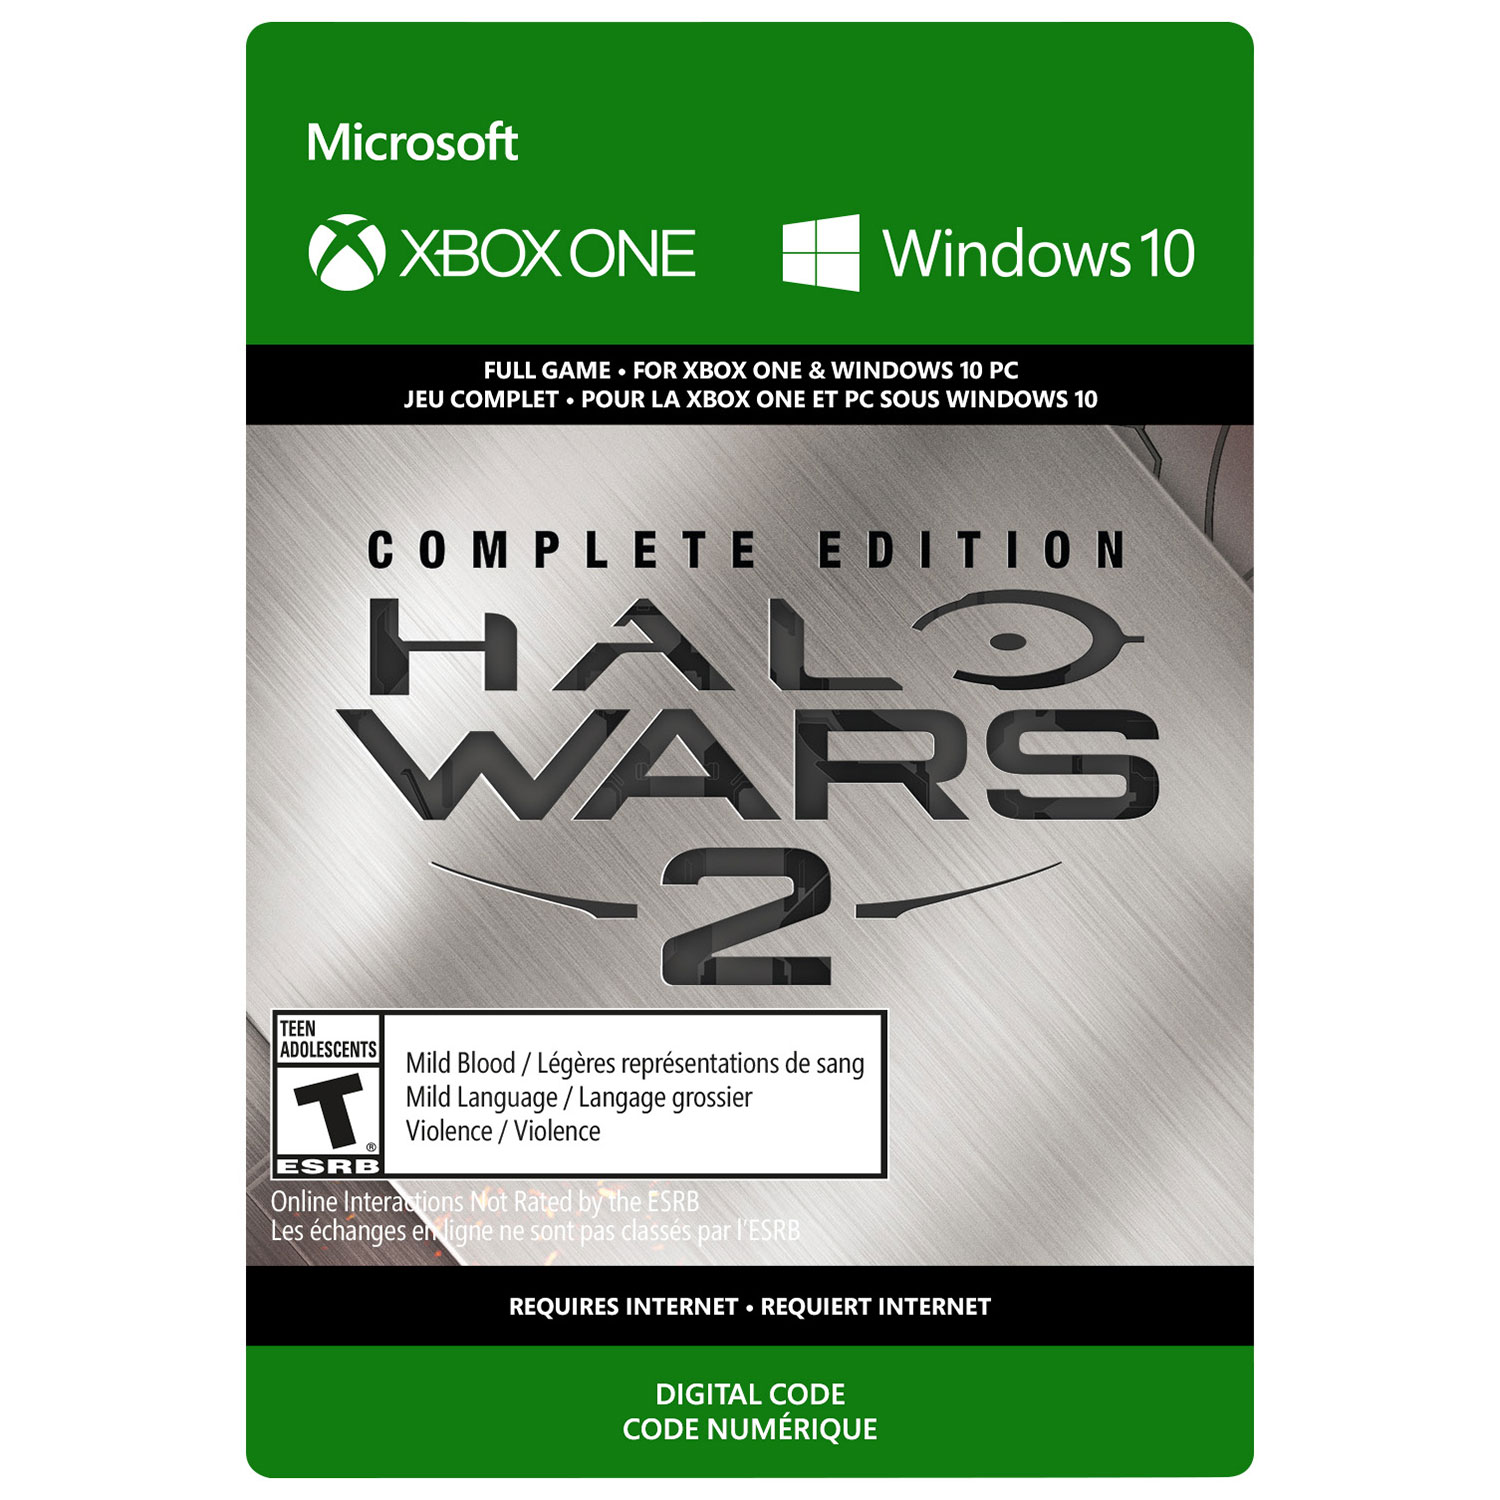 Halo Wars 2: Complete Edition (Xbox One) - Digital Download